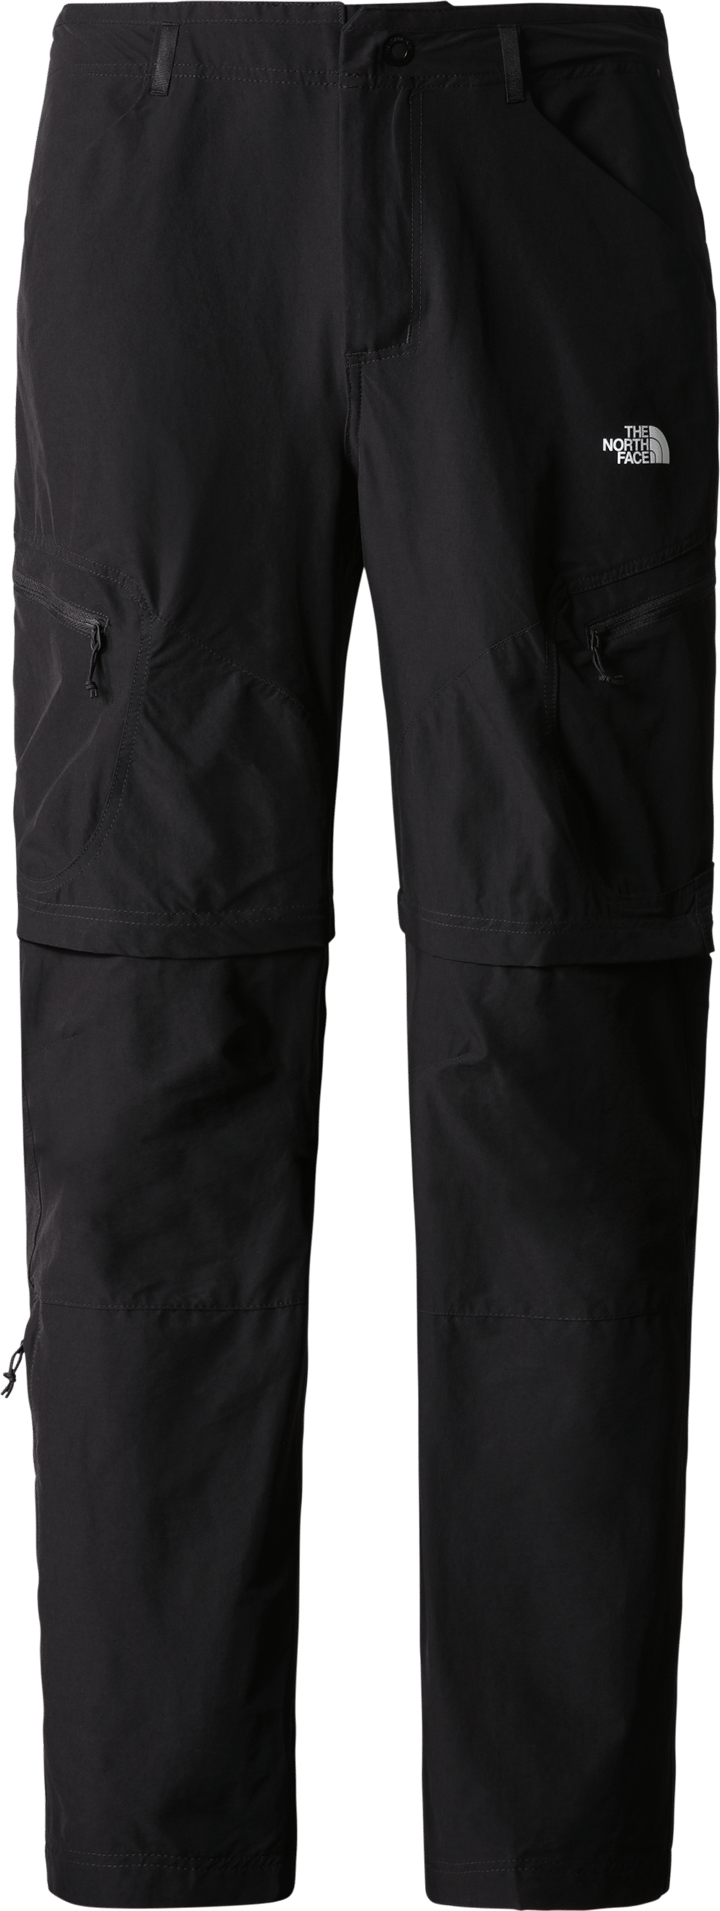 Men's Exploration Convertible Regular Tapered Pant TNF BLACK The North Face